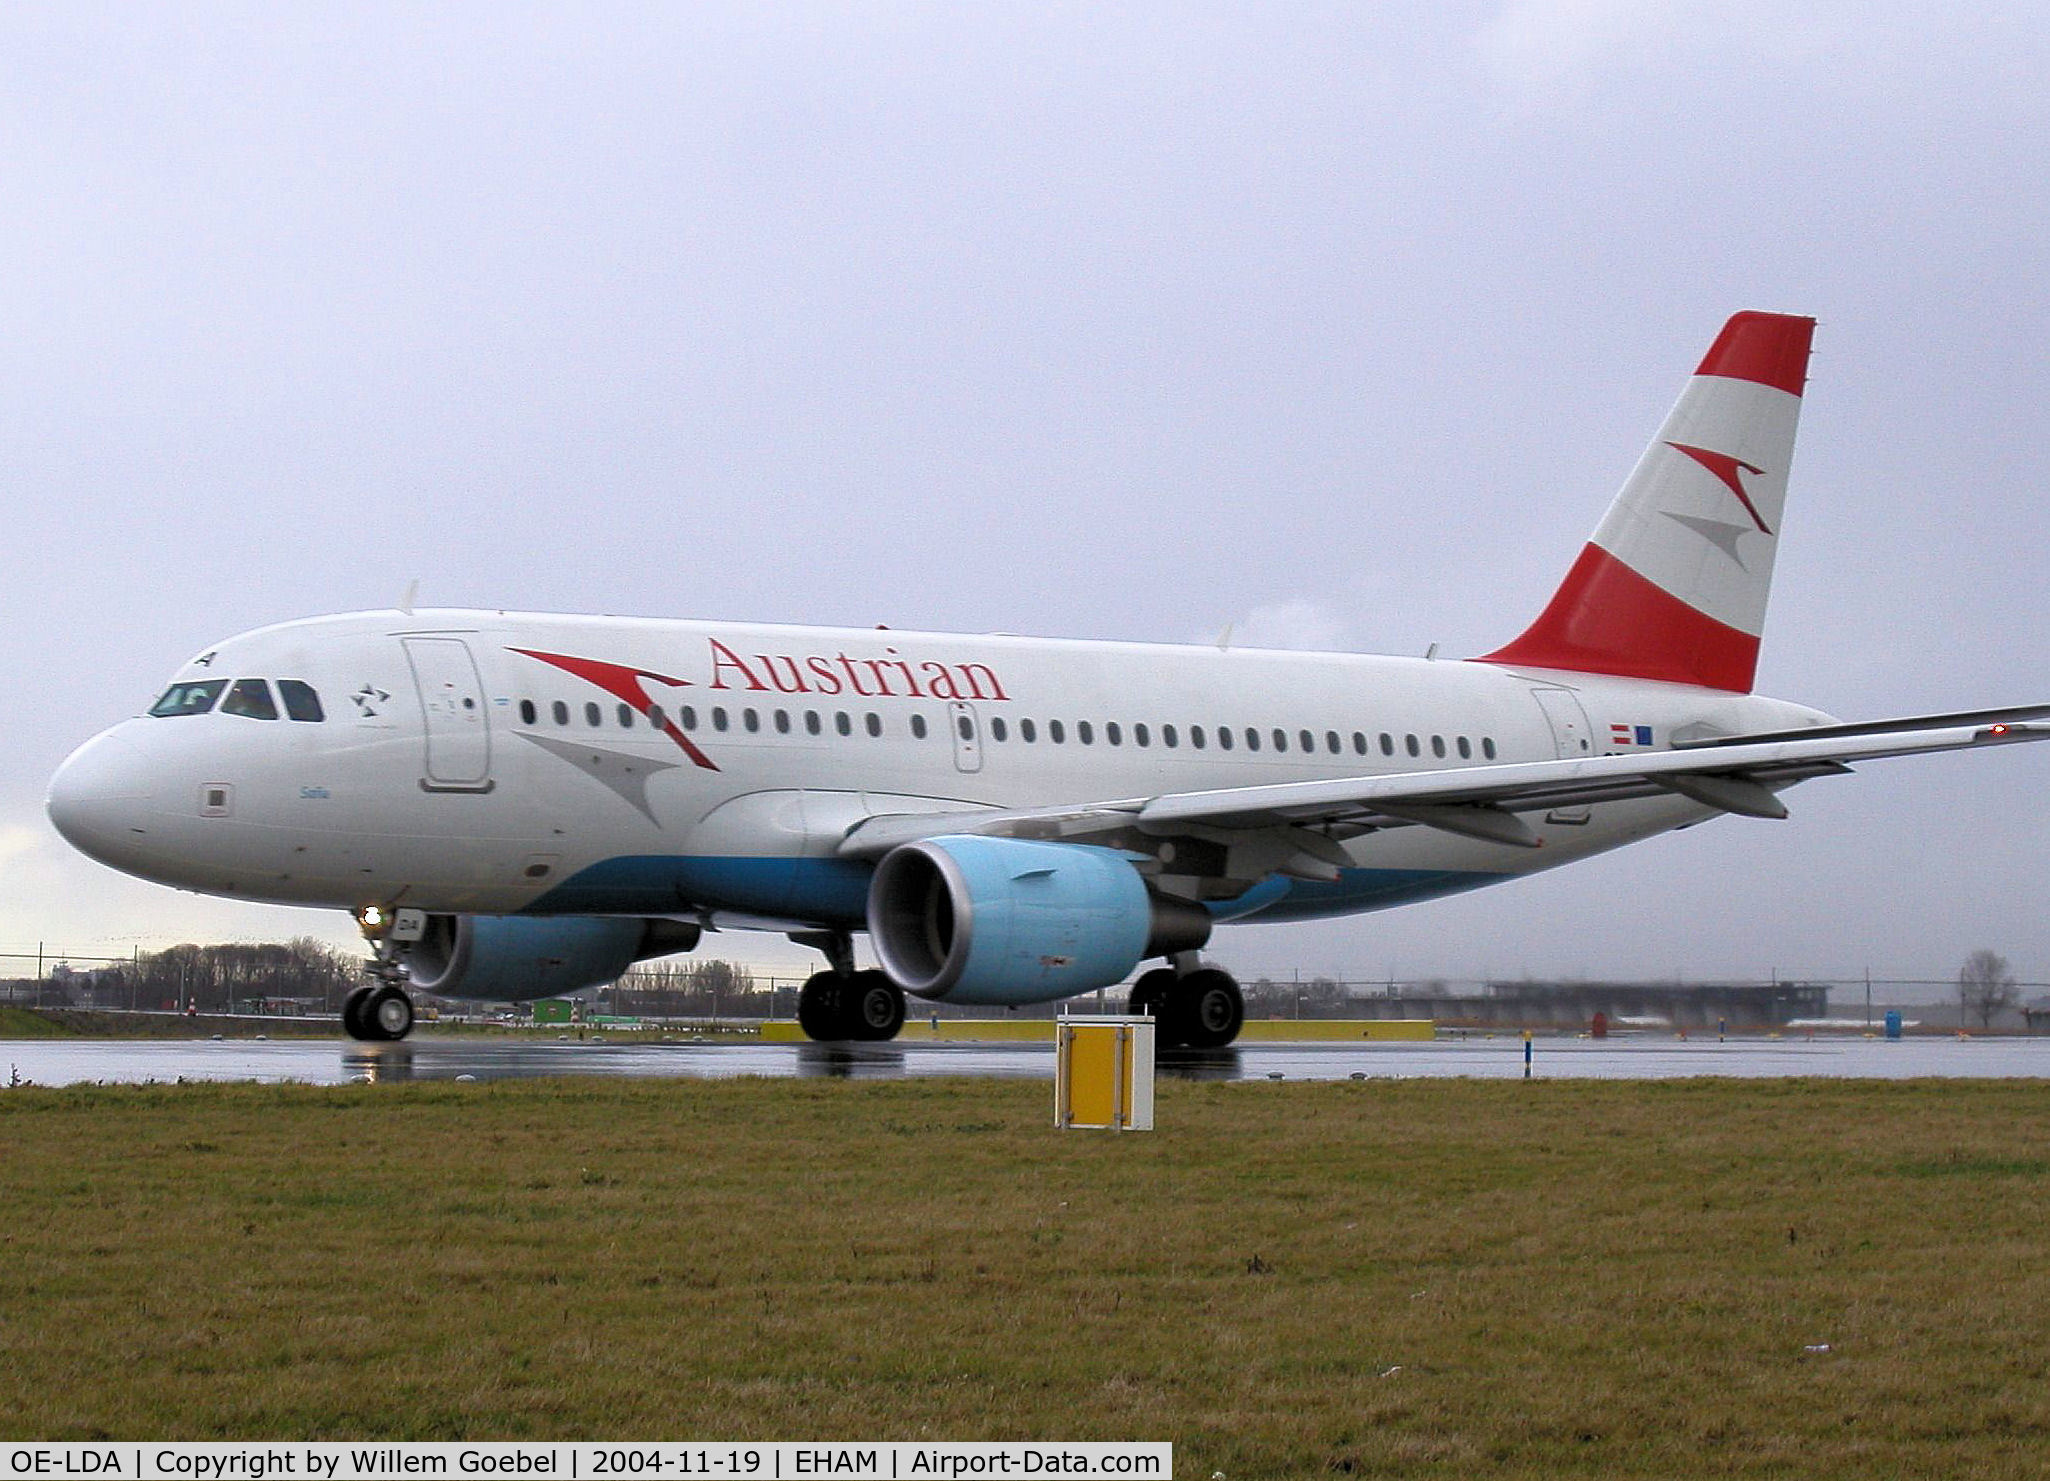 OE-LDA, 2004 Airbus A319-112 C/N 2131, Taxi to the runway L36 of Schiphol Airport Amsterdam